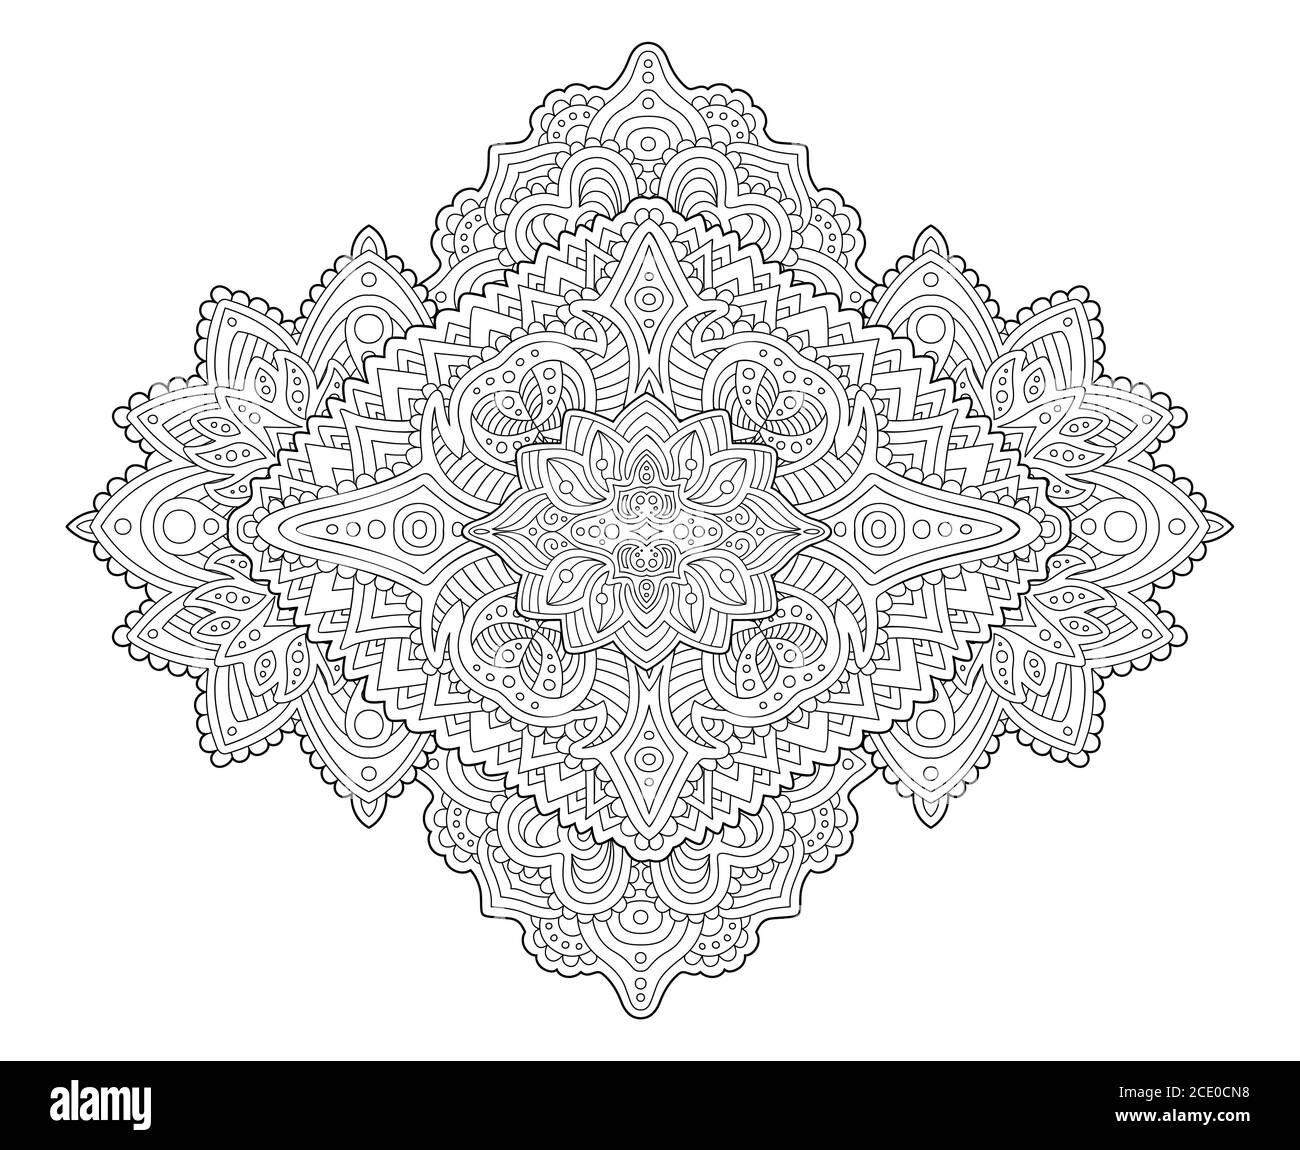 Beautiful coloring book page with detailed decorative abstract art on white background Stock Vector